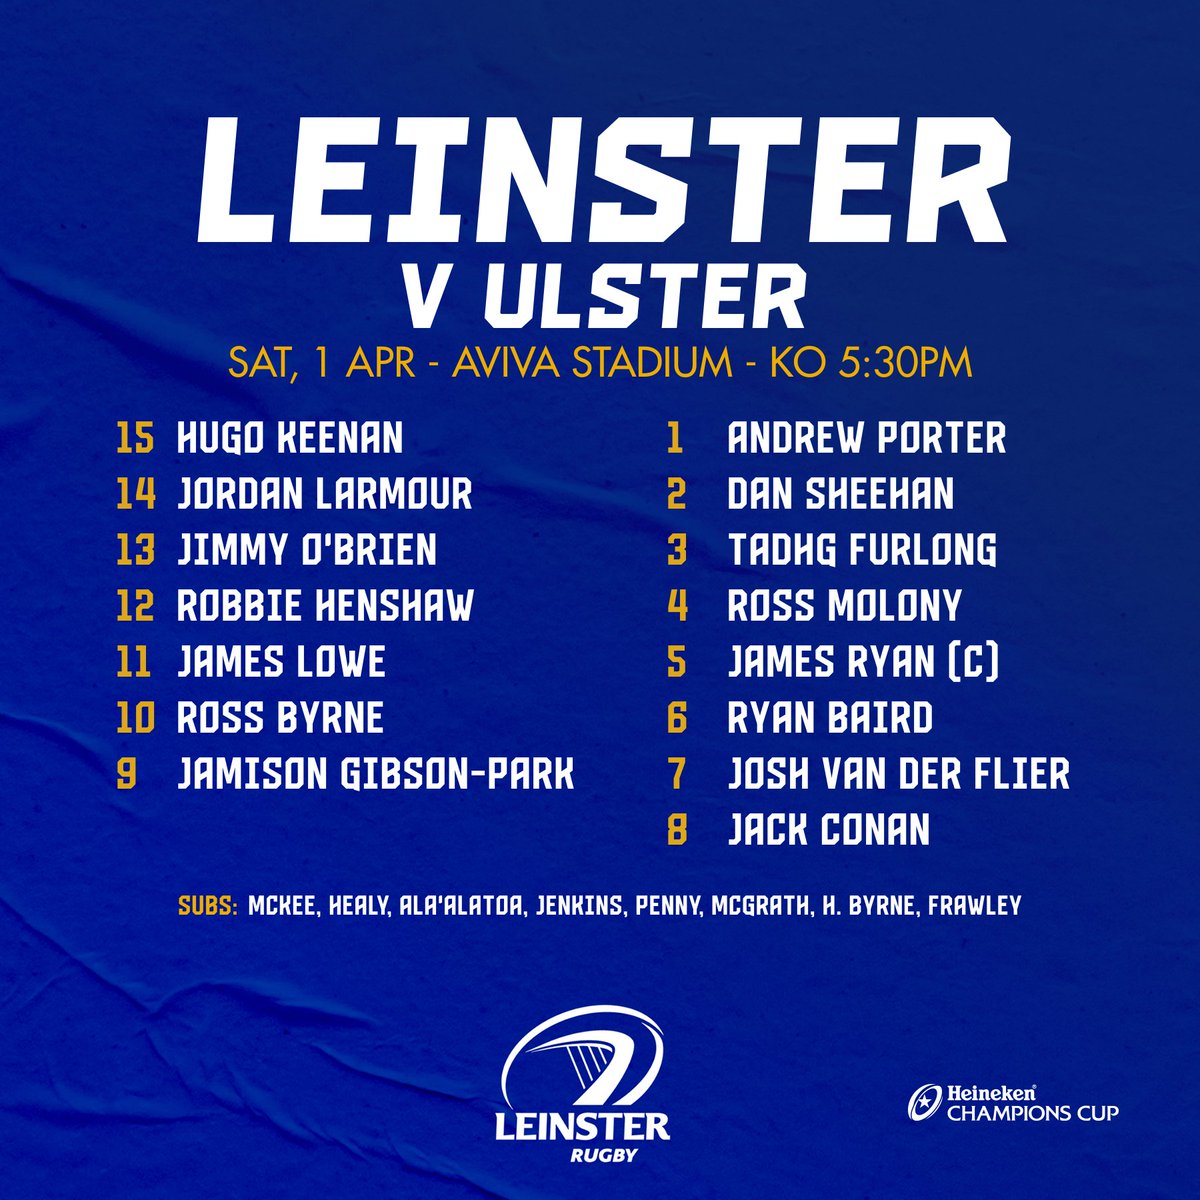 🔵 | This is the Leinster Rugby team that will take on Ulster tomorrow evening at Aviva Stadium. 

#LEIvULS #HeinekenChampionsCup